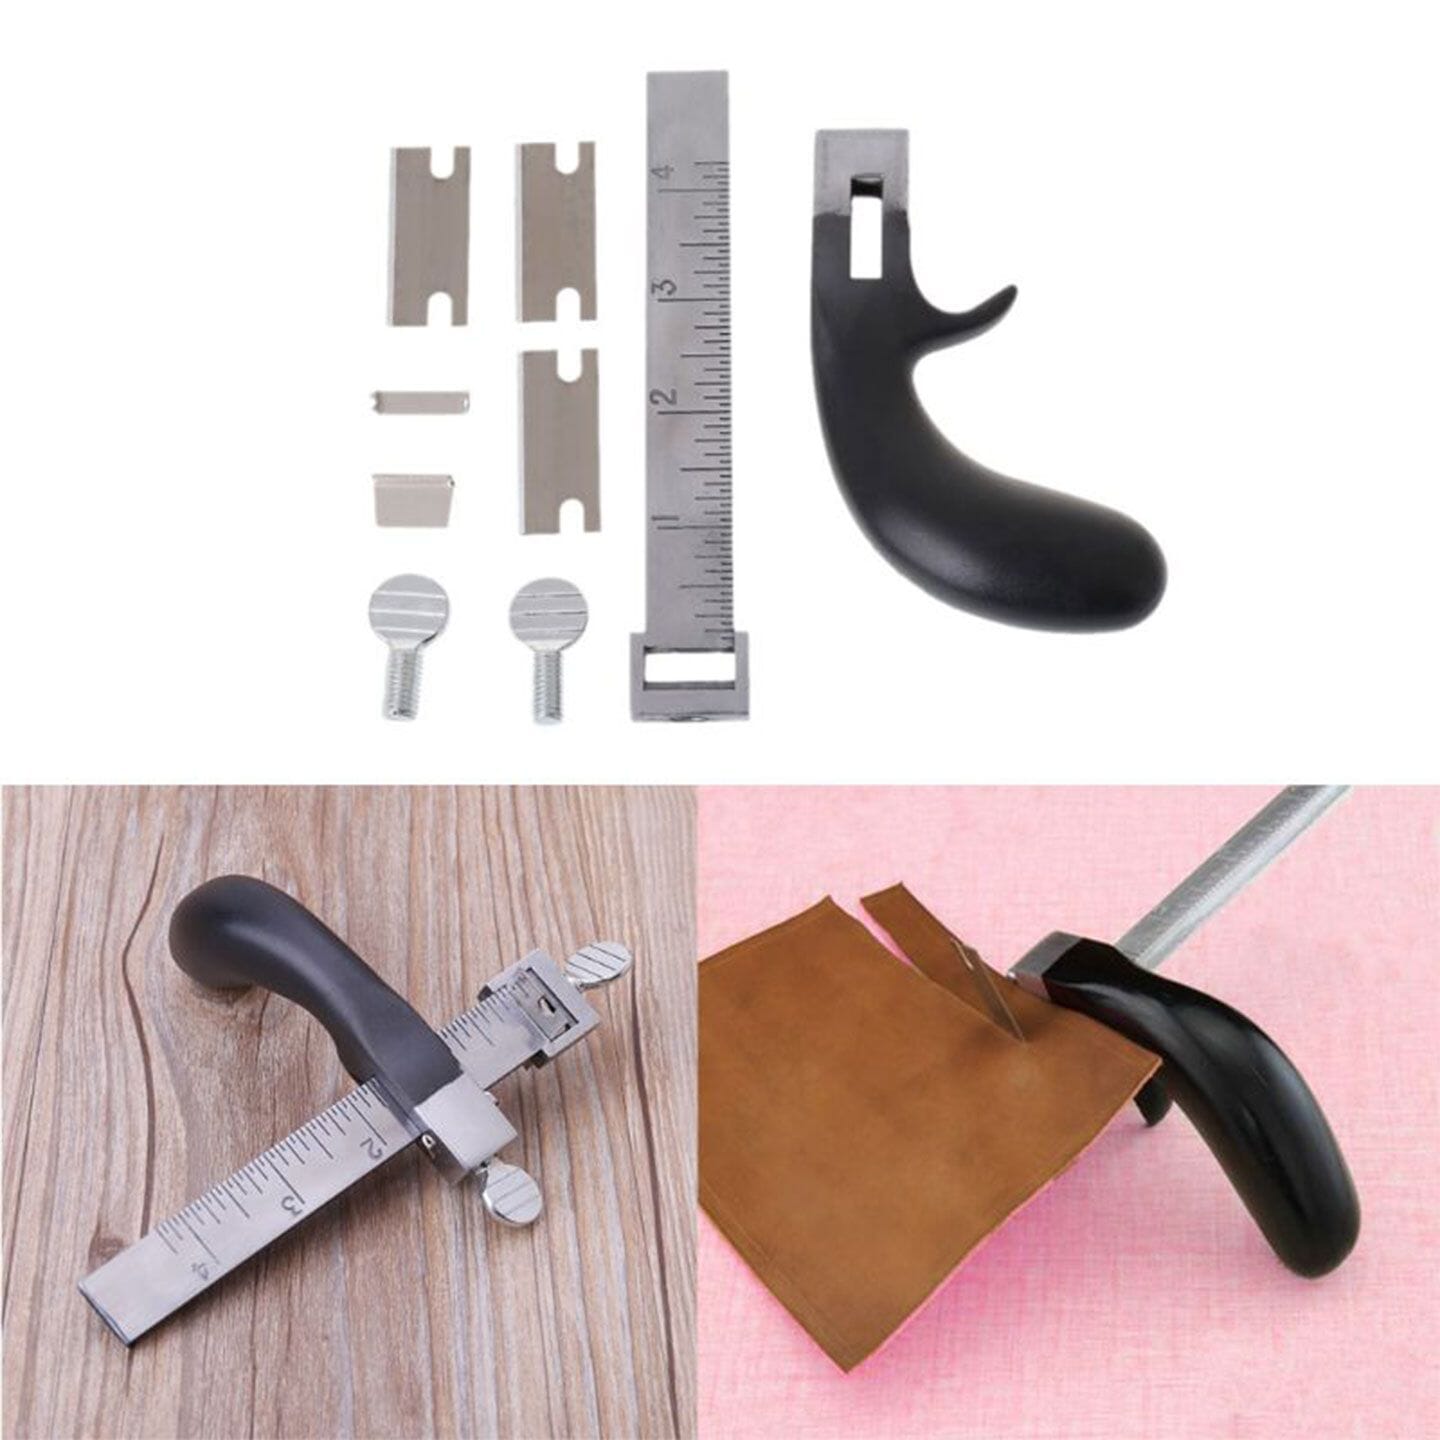 Leathercraft Adjustable Aluminum Leather Strap and Belt Draw Gauge Cutter  Set, with Replacement Blades, to Cut Leather Strips